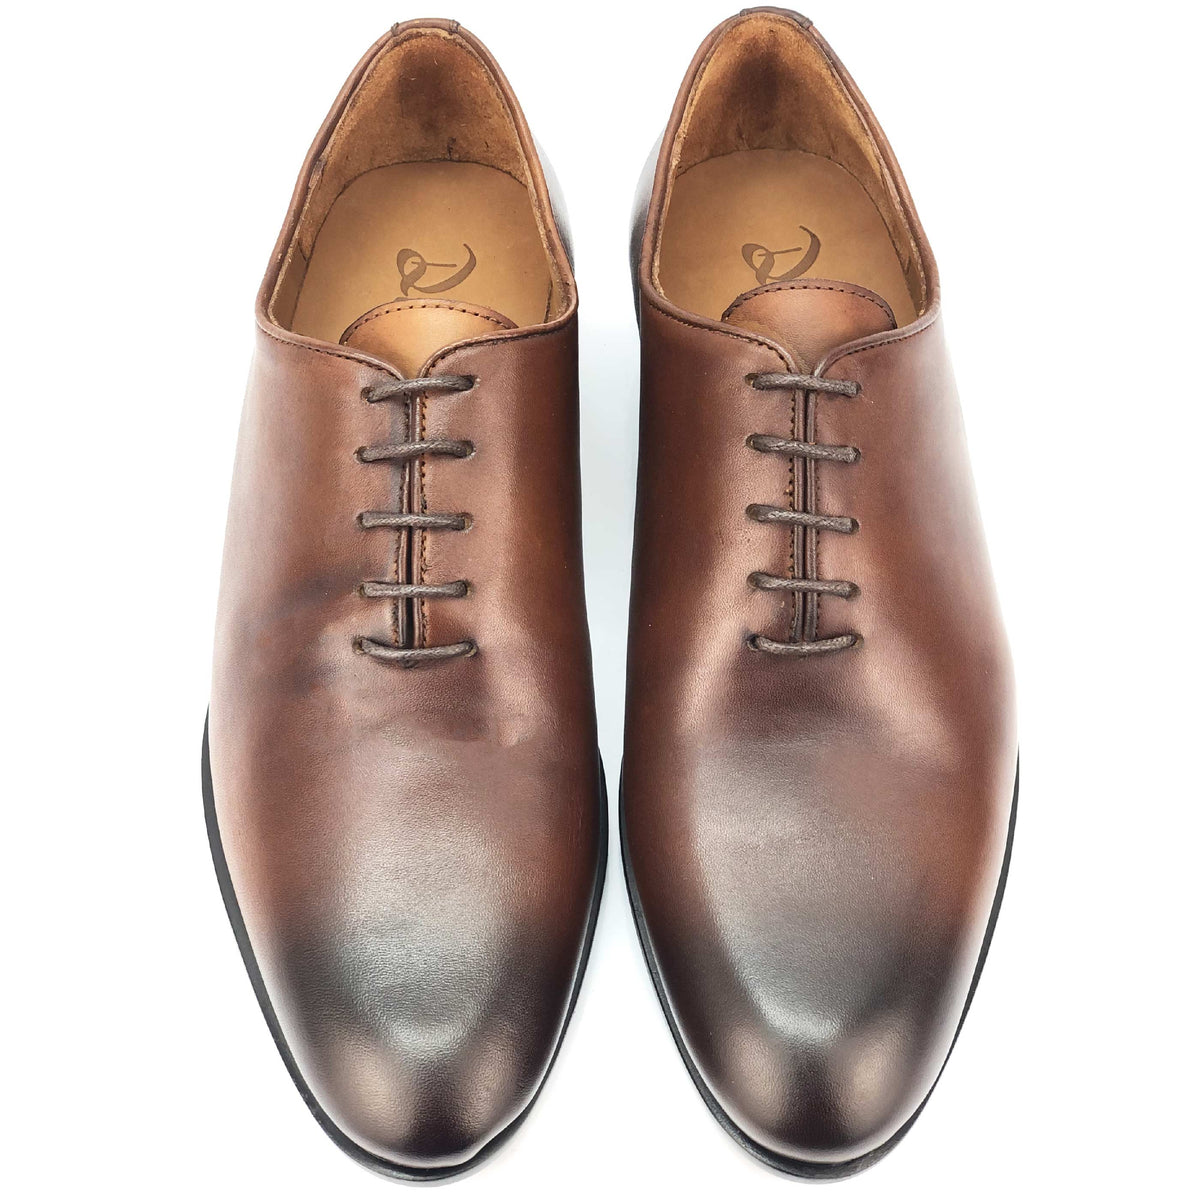 CH587-015 - Chaussure cuir Tabac - deluxe-maroc